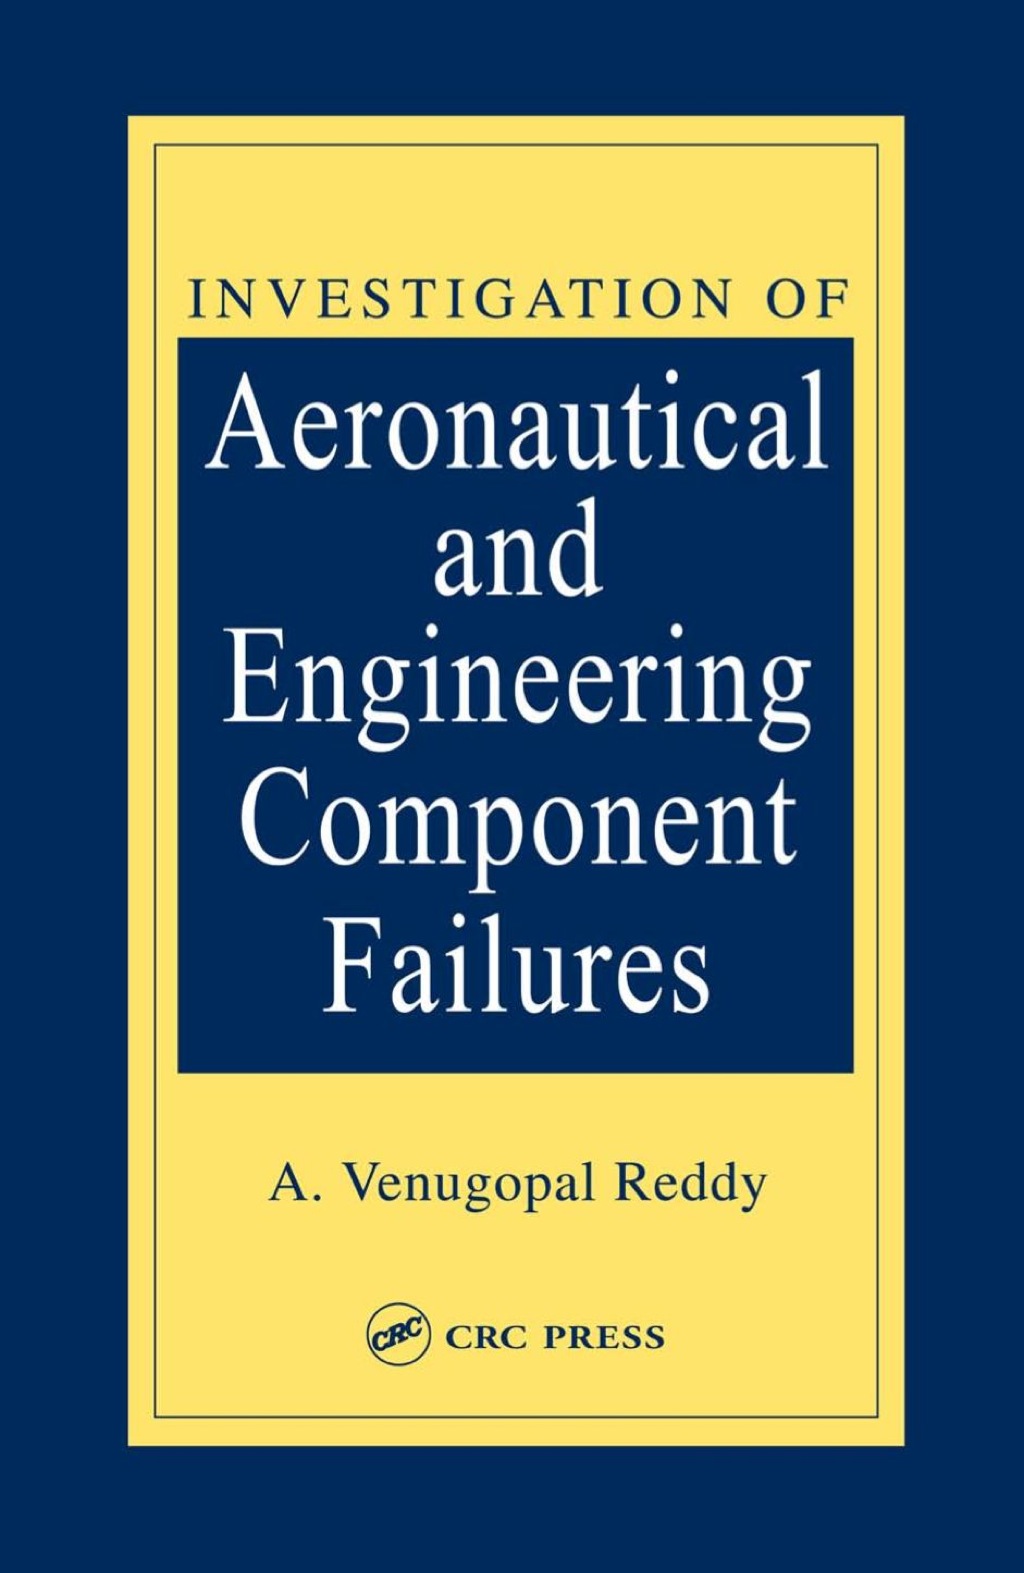 Investigation of Aeronautical and Engineering Component Failures (eBook) - A. Venugopal Reddy